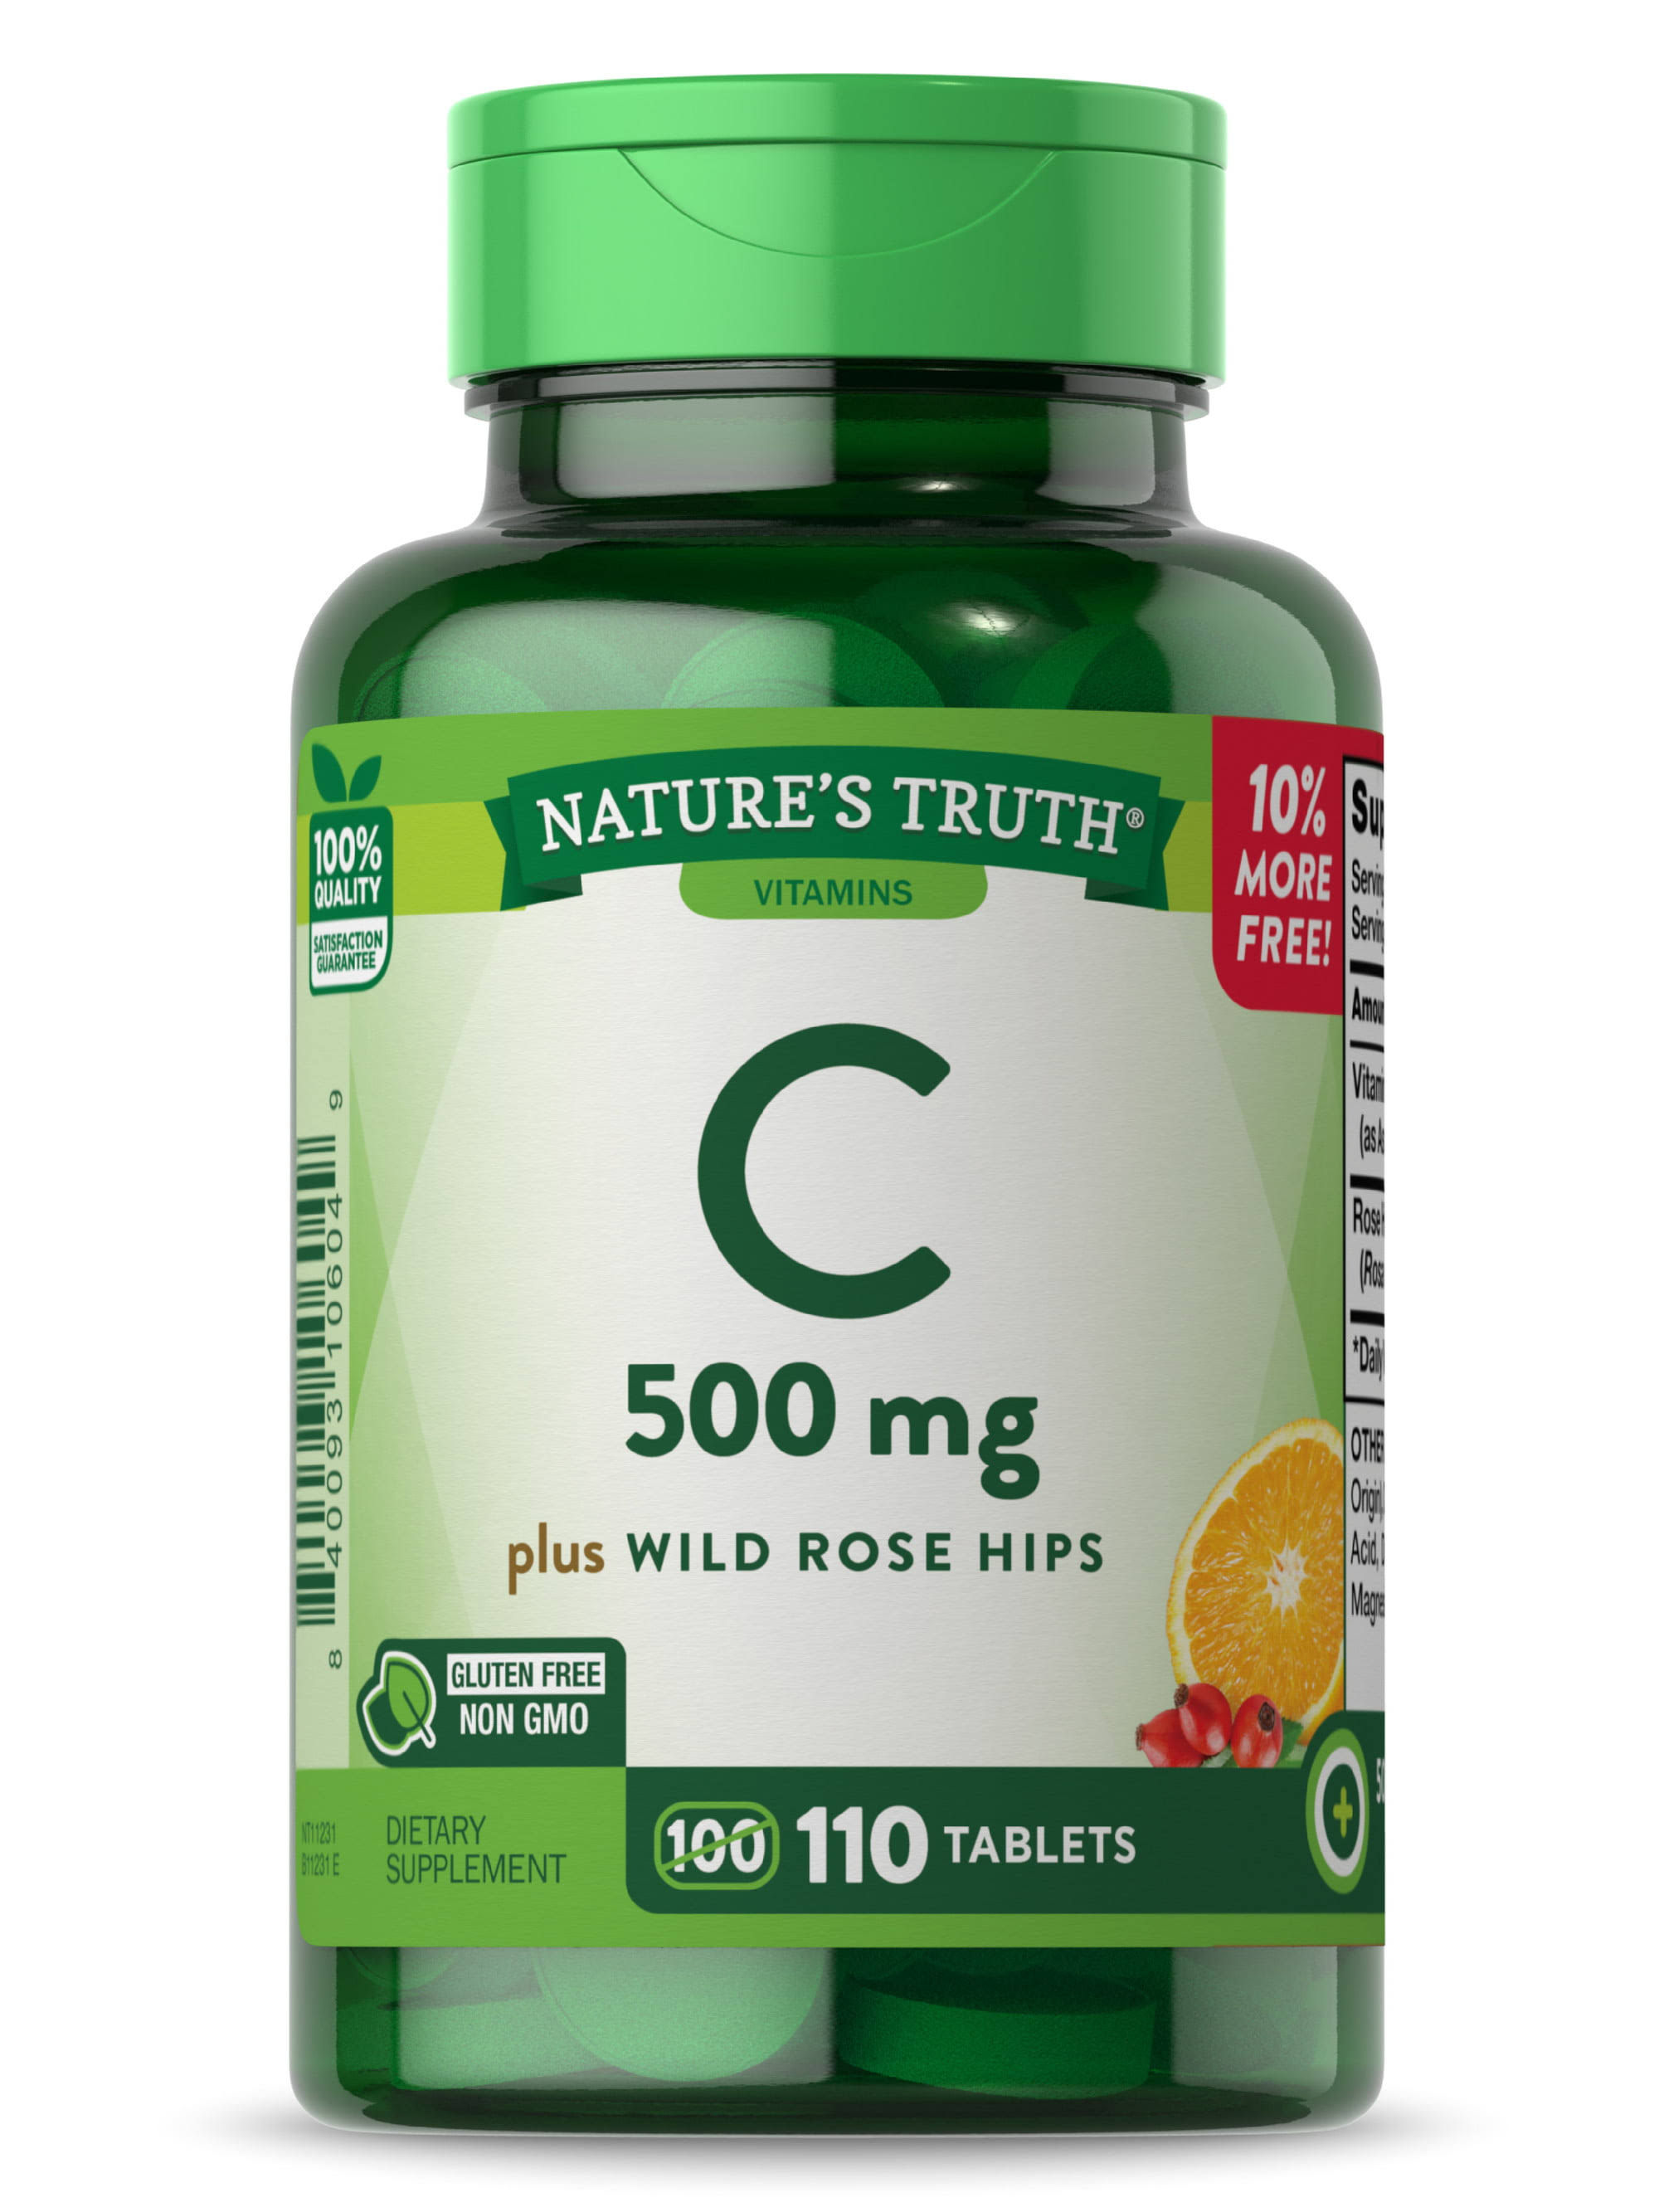 Nature's Truth Vitamin C Plus Wild Rose Hips 500 MG 110 Tablets